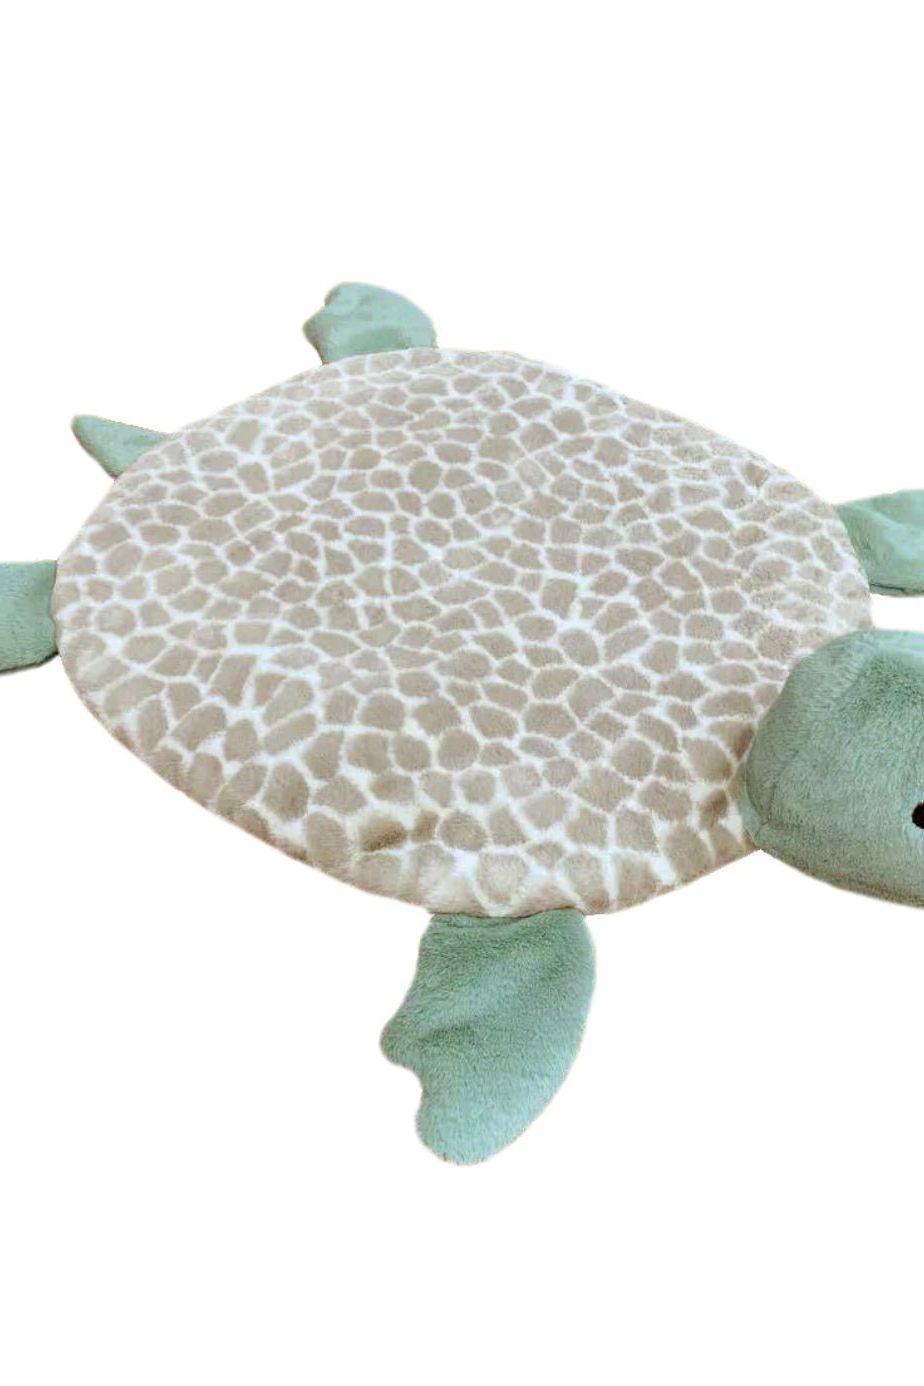 Taylor the Turtle Play Mat - Magical 28" x 36" Makes Tummy Time and Playtime Fun - Sophia Rose Children's Boutique